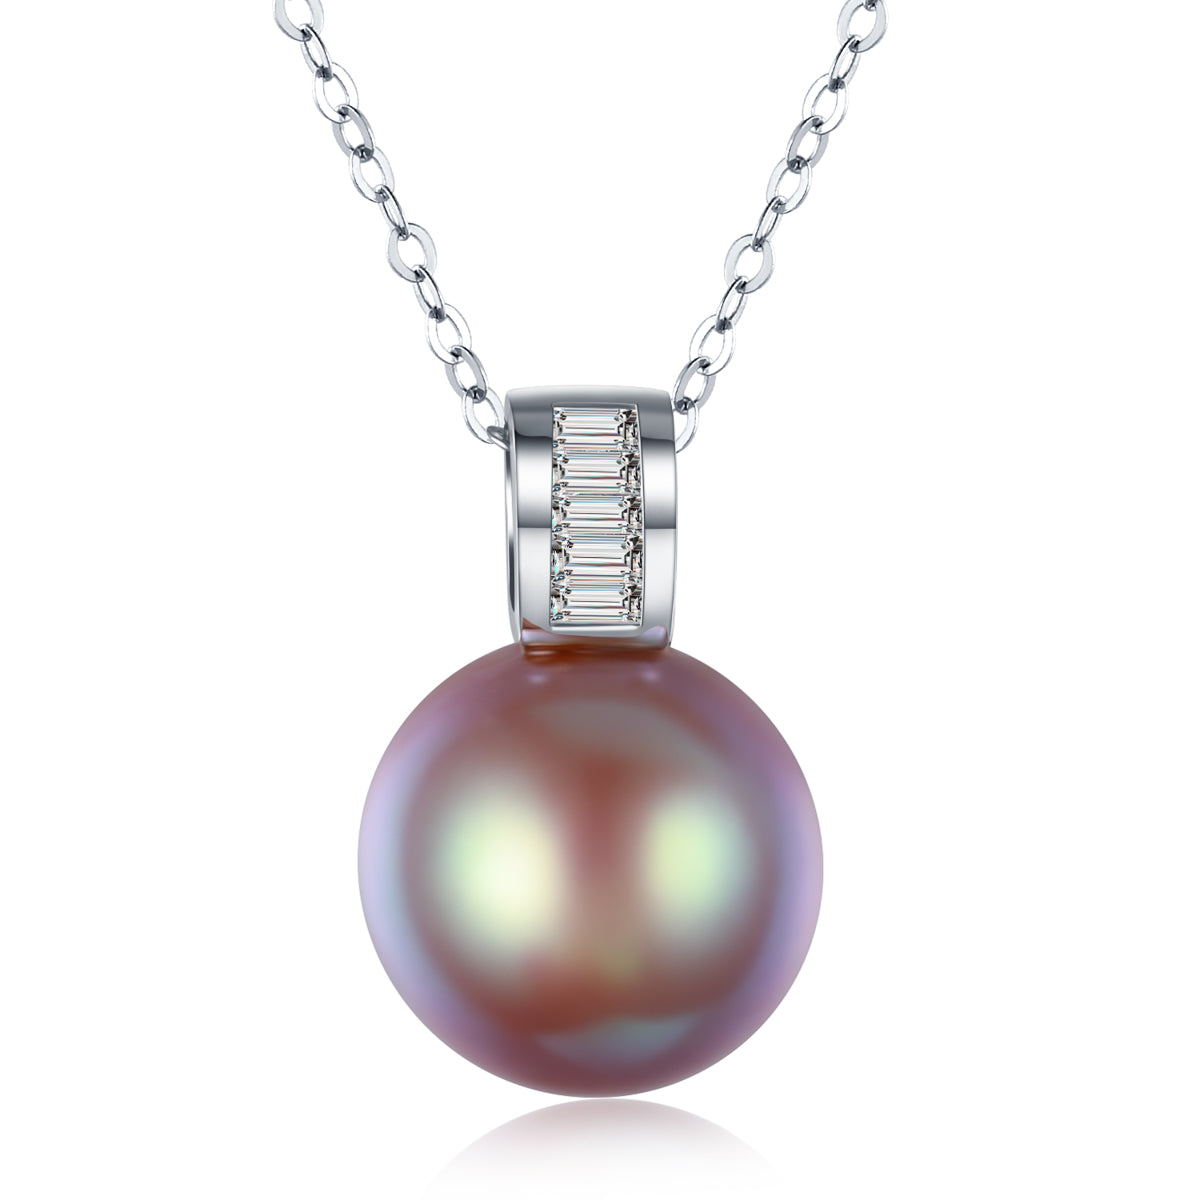 G18k Steam Beauty Luminescent Pearl Necklace - Timeless Pearl